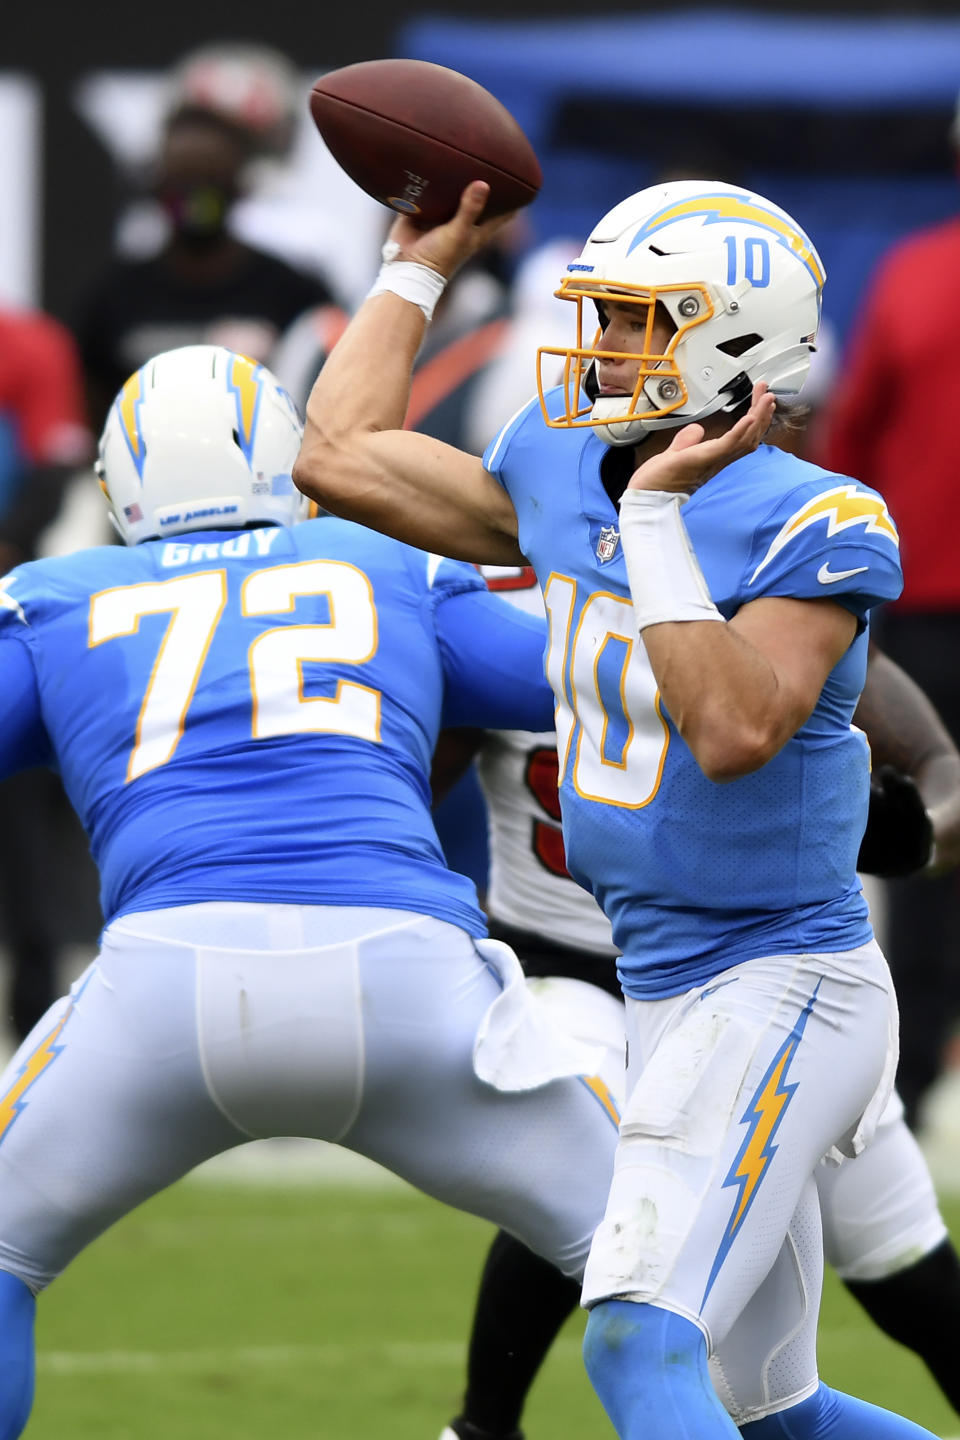 Los Angeles Chargers quarterback Justin Herbert (10) throws a pass against the Tampa Bay Buccaneers during the first half of an NFL football game Sunday, Oct. 4, 2020, in Tampa, Fla. (AP Photo/Jason Behnken)